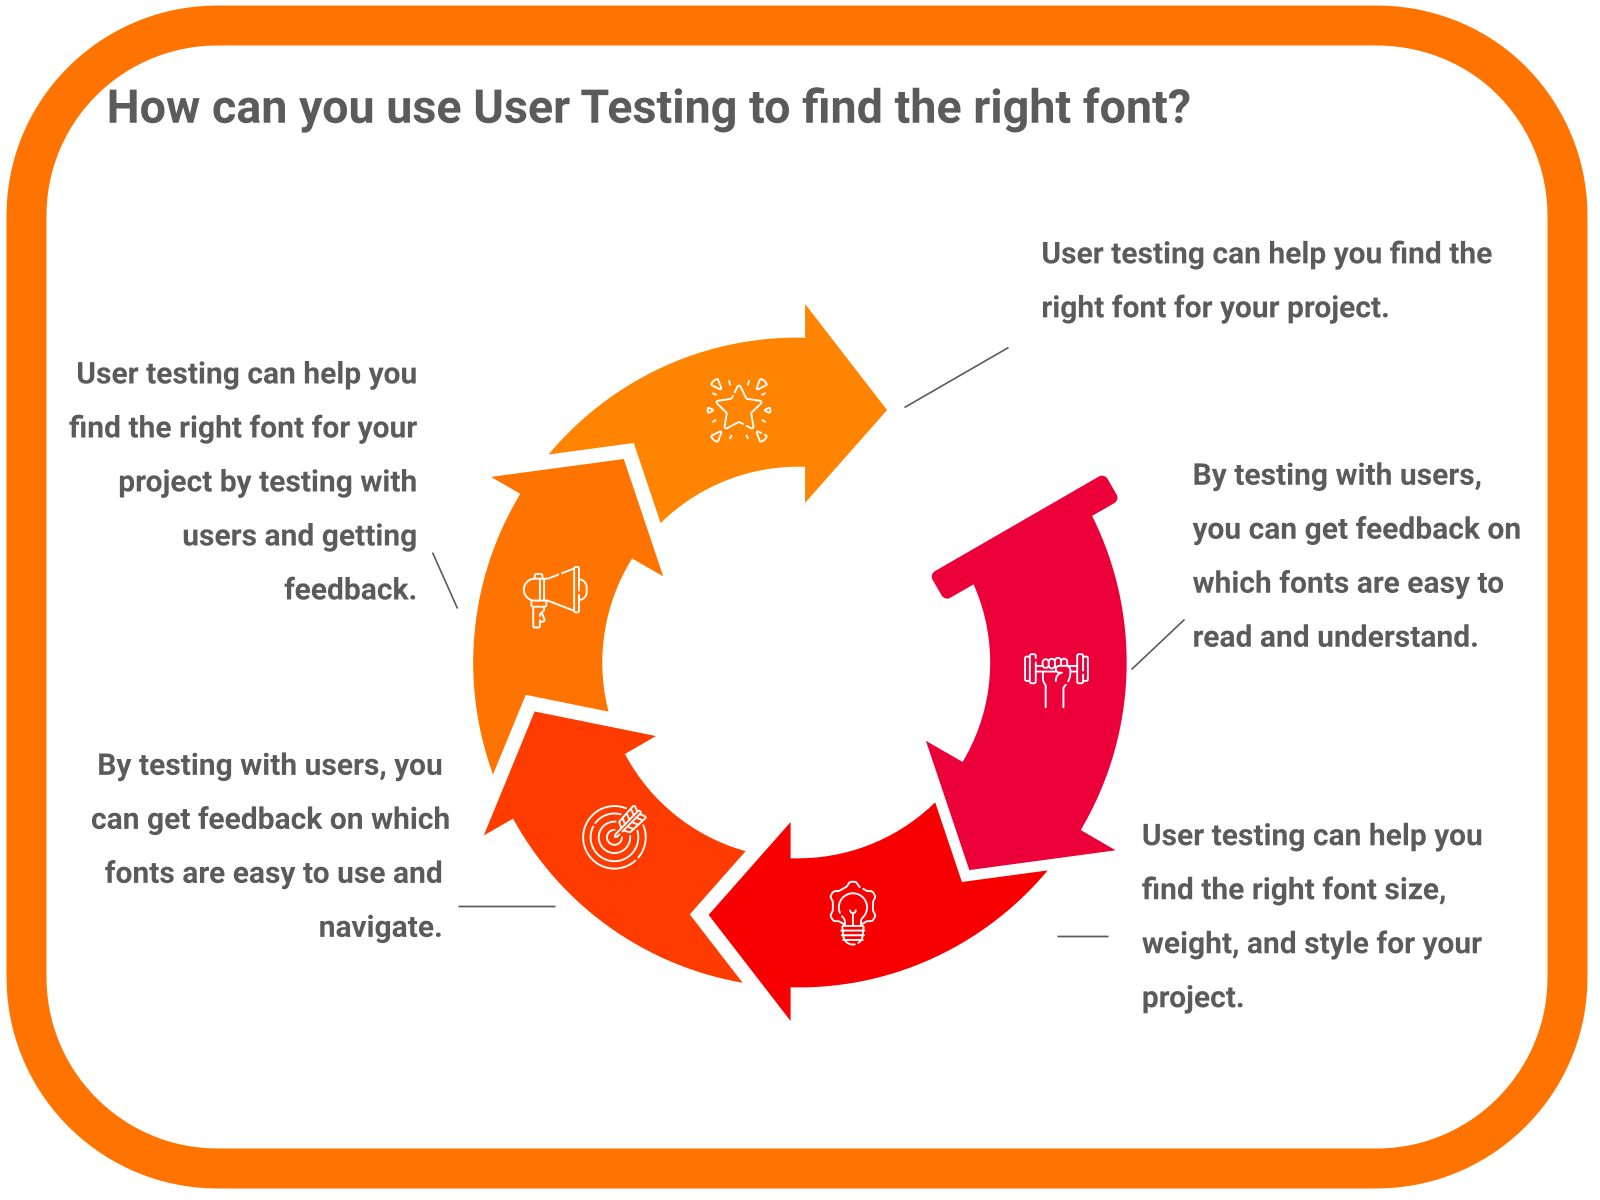 What to look for during a user testing session